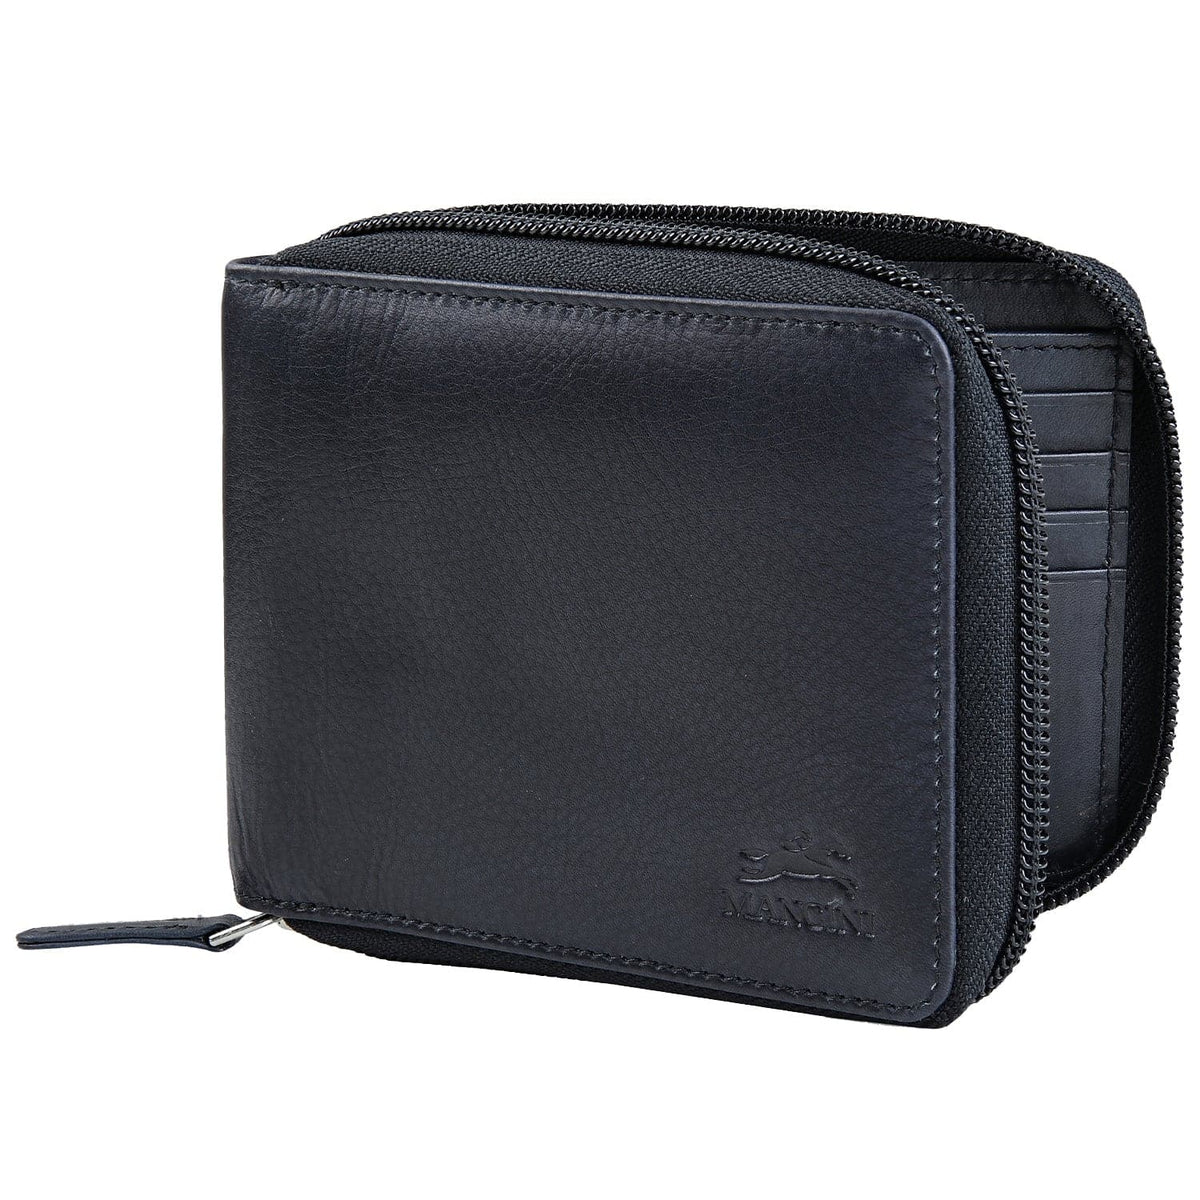 Mancini Bellagio RFID Zippered Wallet with Removable Passcase